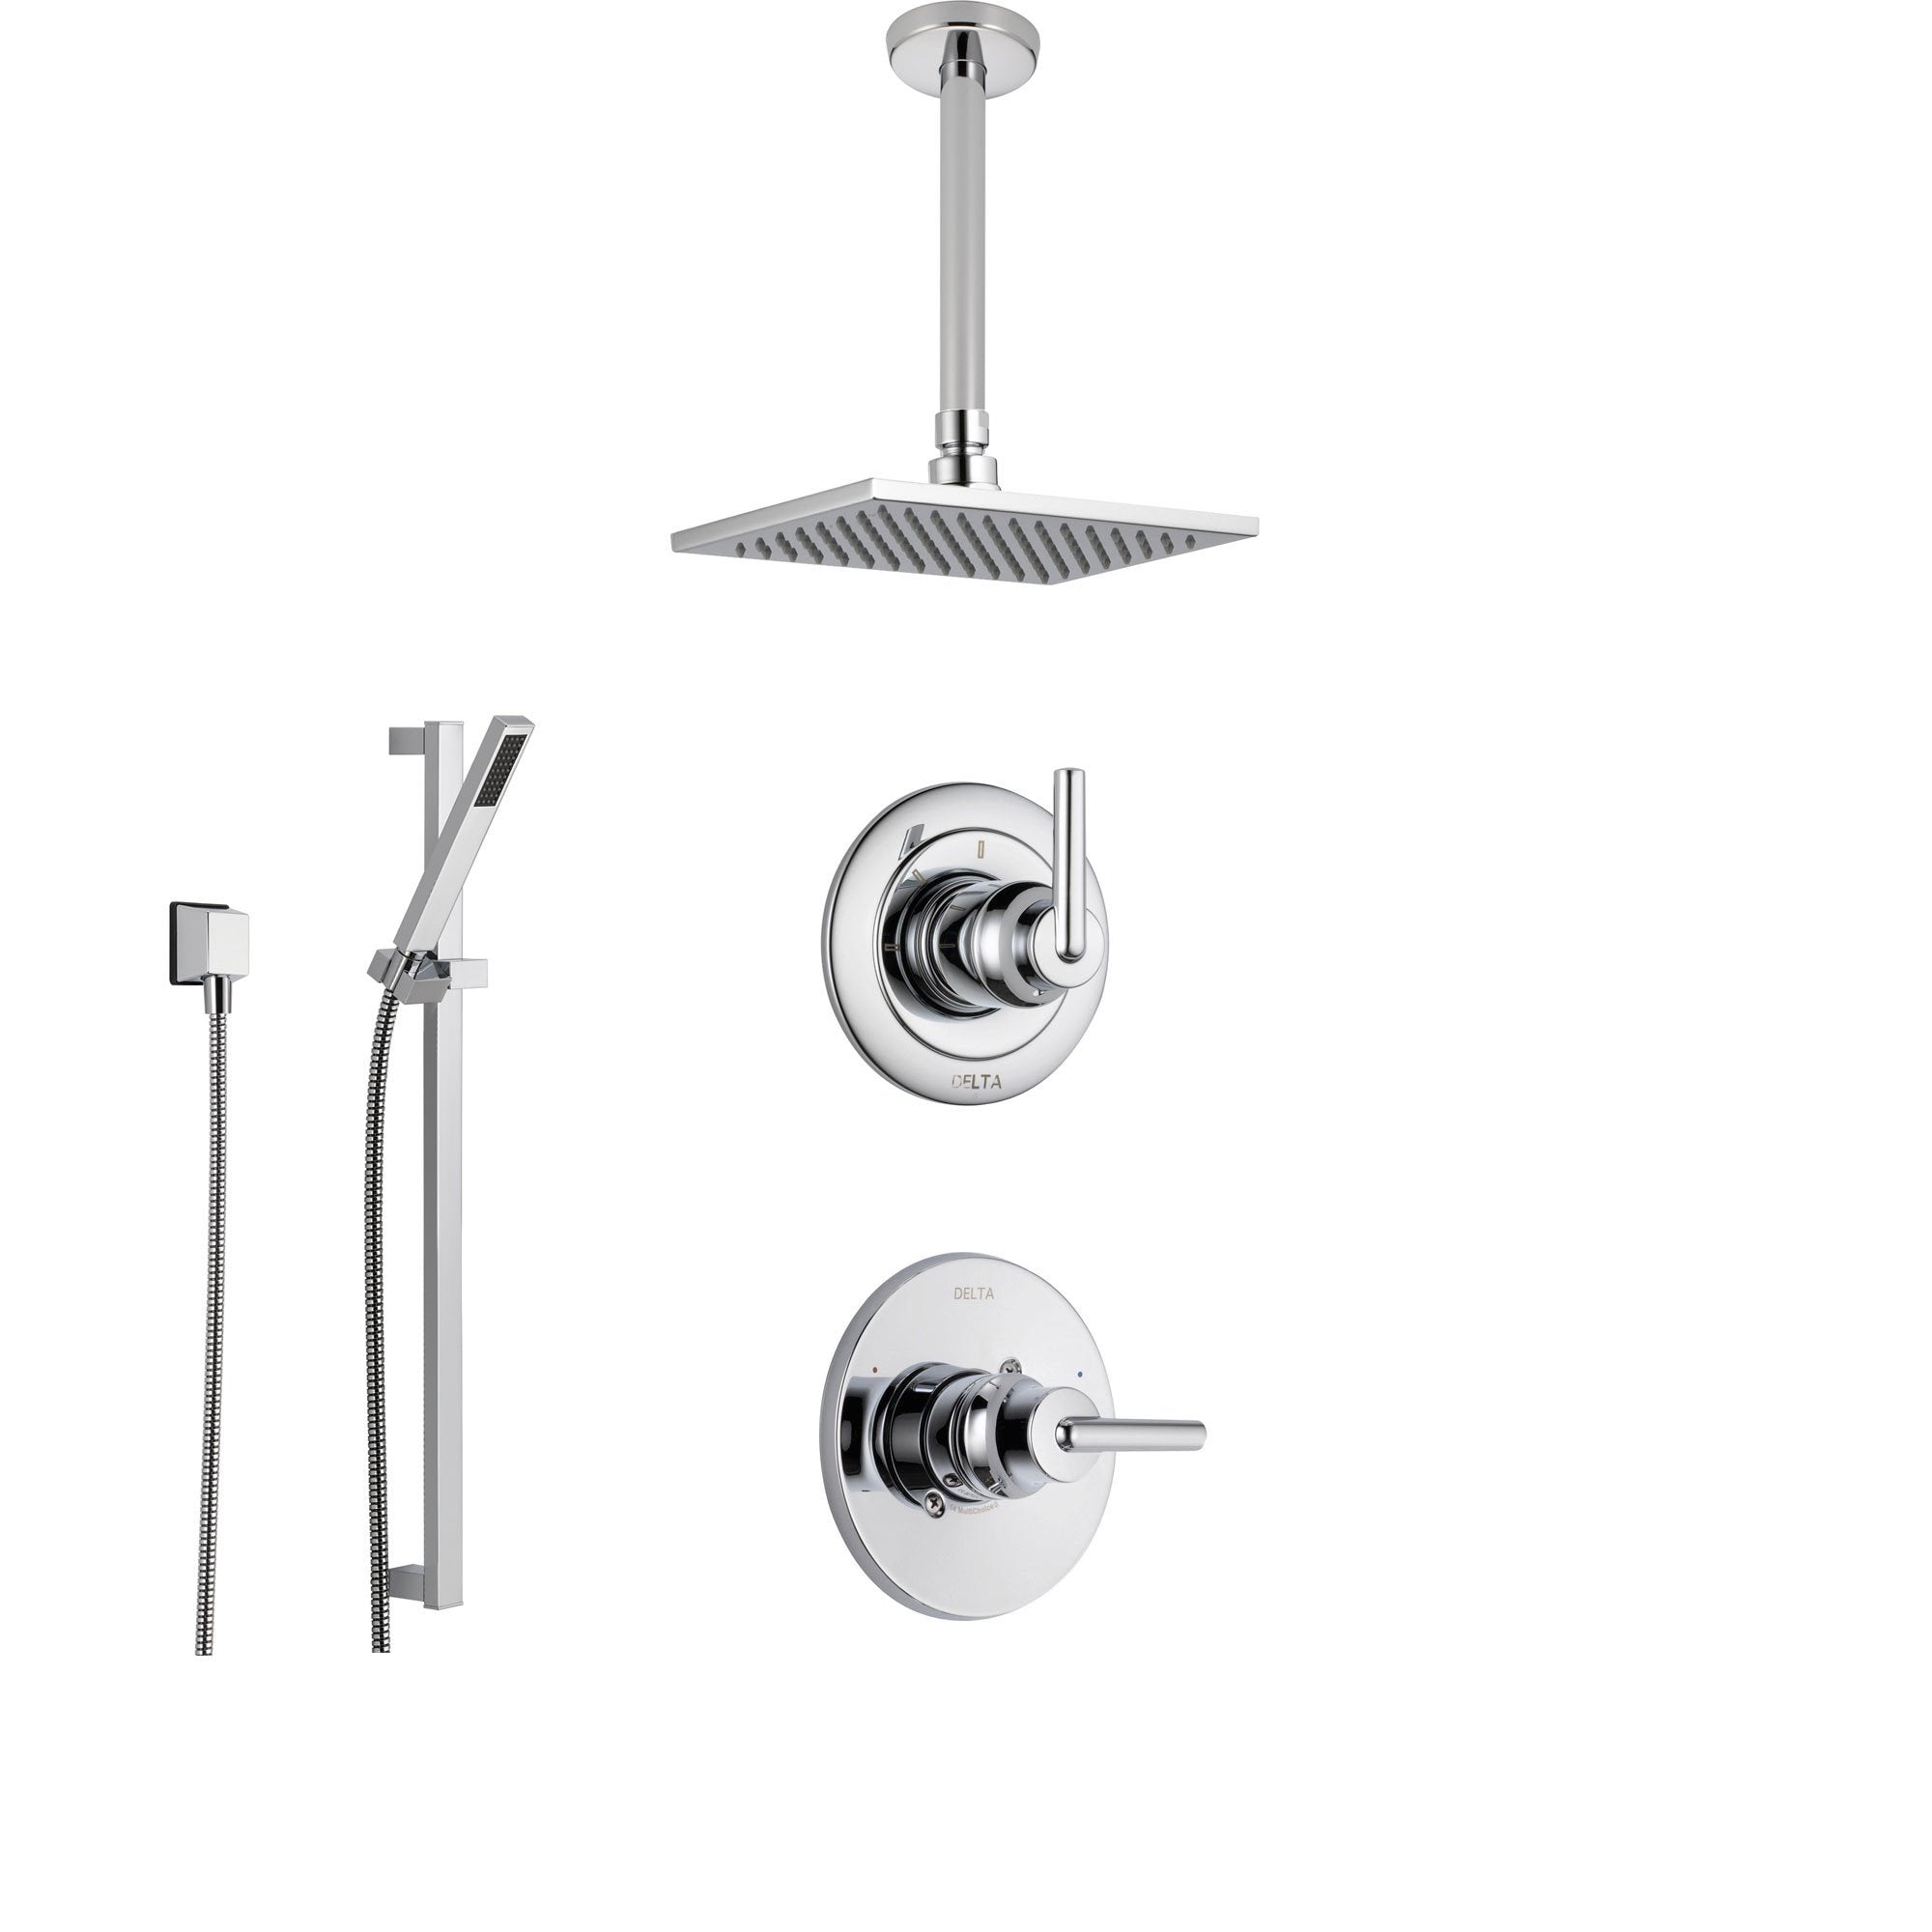 Delta Trinsic Chrome Shower System With Normal Shower Handle 3 Setting Diverter Ceiling Mount Large Rain Showerhead And Handheld Spray Ss145985